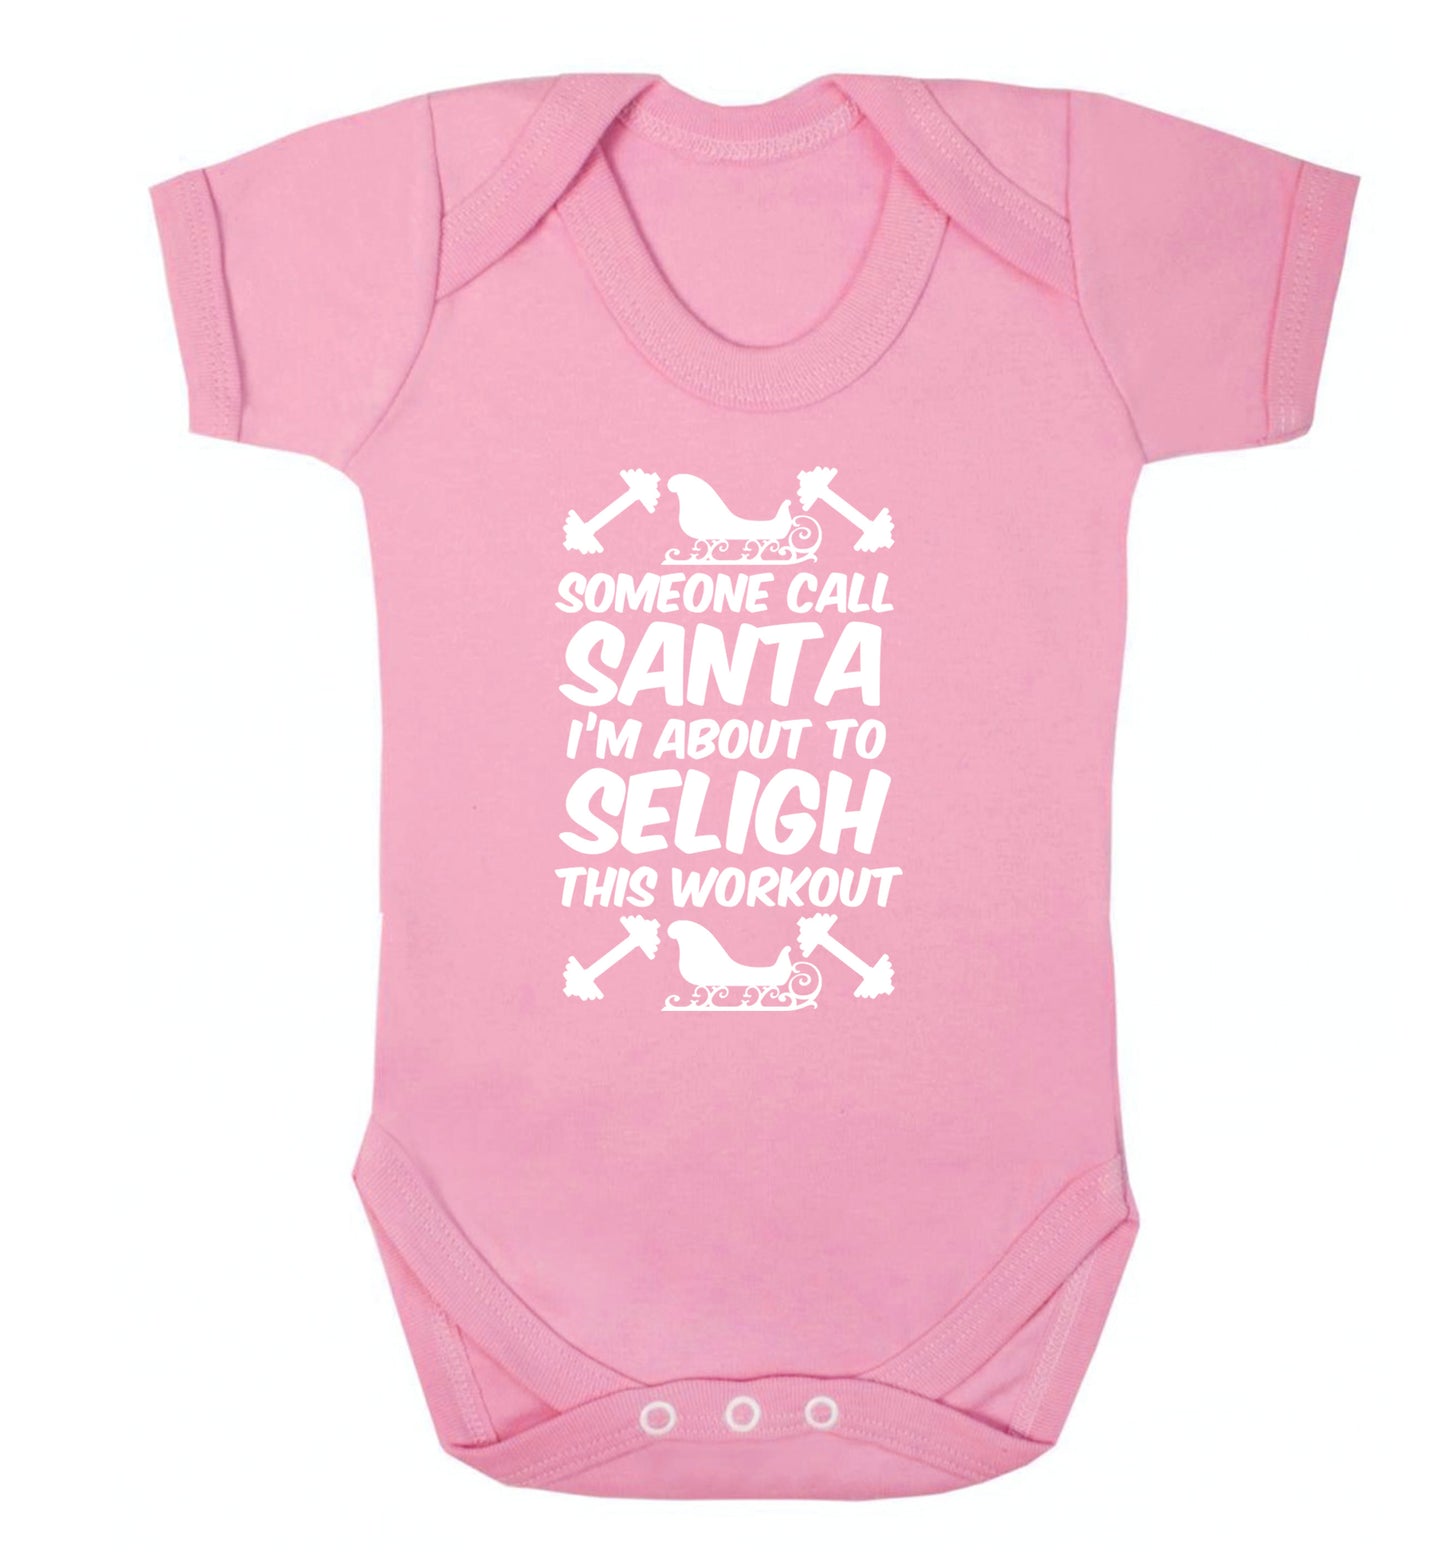 Someone call santa, I'm about to sleigh this workout Baby Vest pale pink 18-24 months